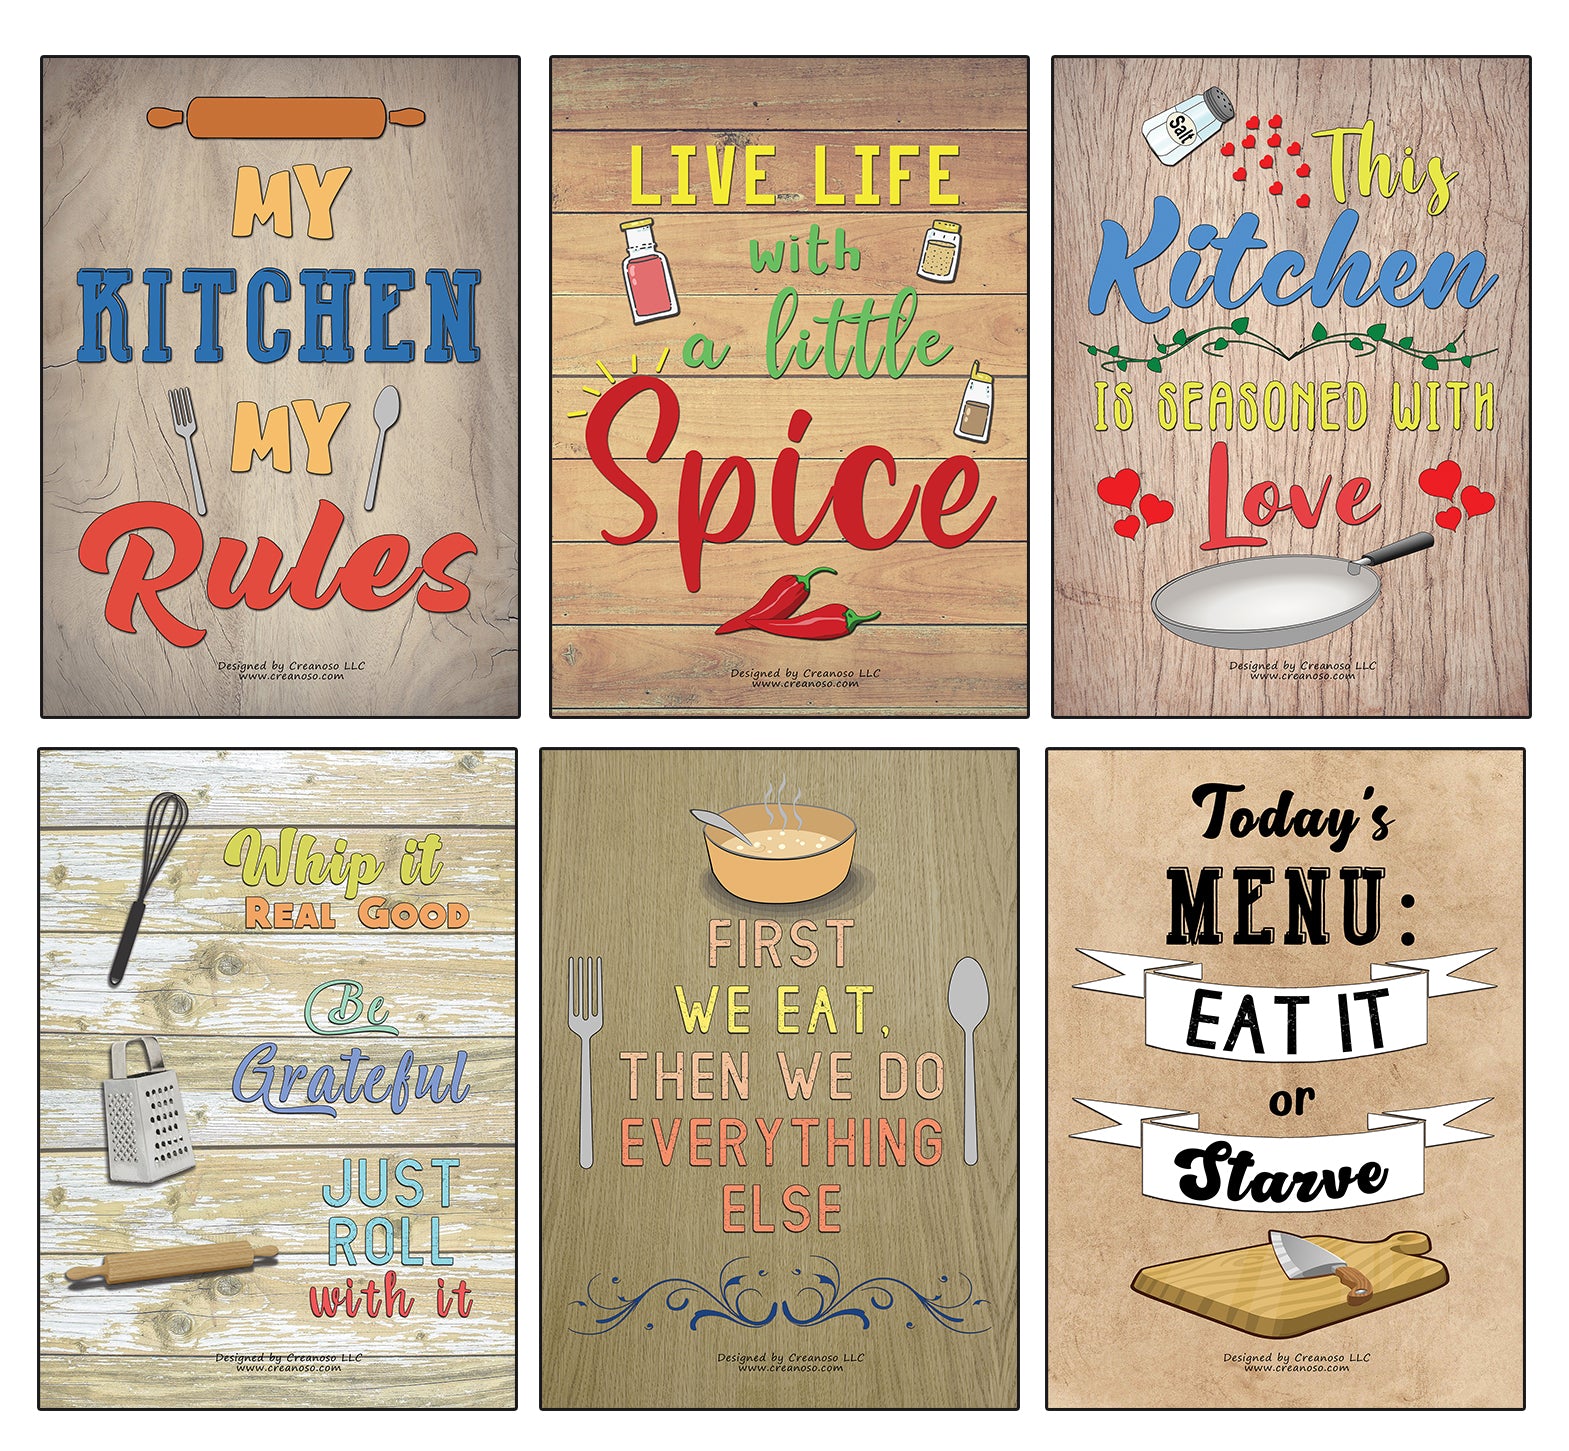 Creanoso Kitchen Quotes and Sayings Poster Prints (12-Pack) - Great Gifts Collection Bulk Set â€“ Unique Stocking Stuffers for Office Workers Teachers Employees Men Women â€“ Wall Art Home DÃ©cor â€“ Great Value Buy